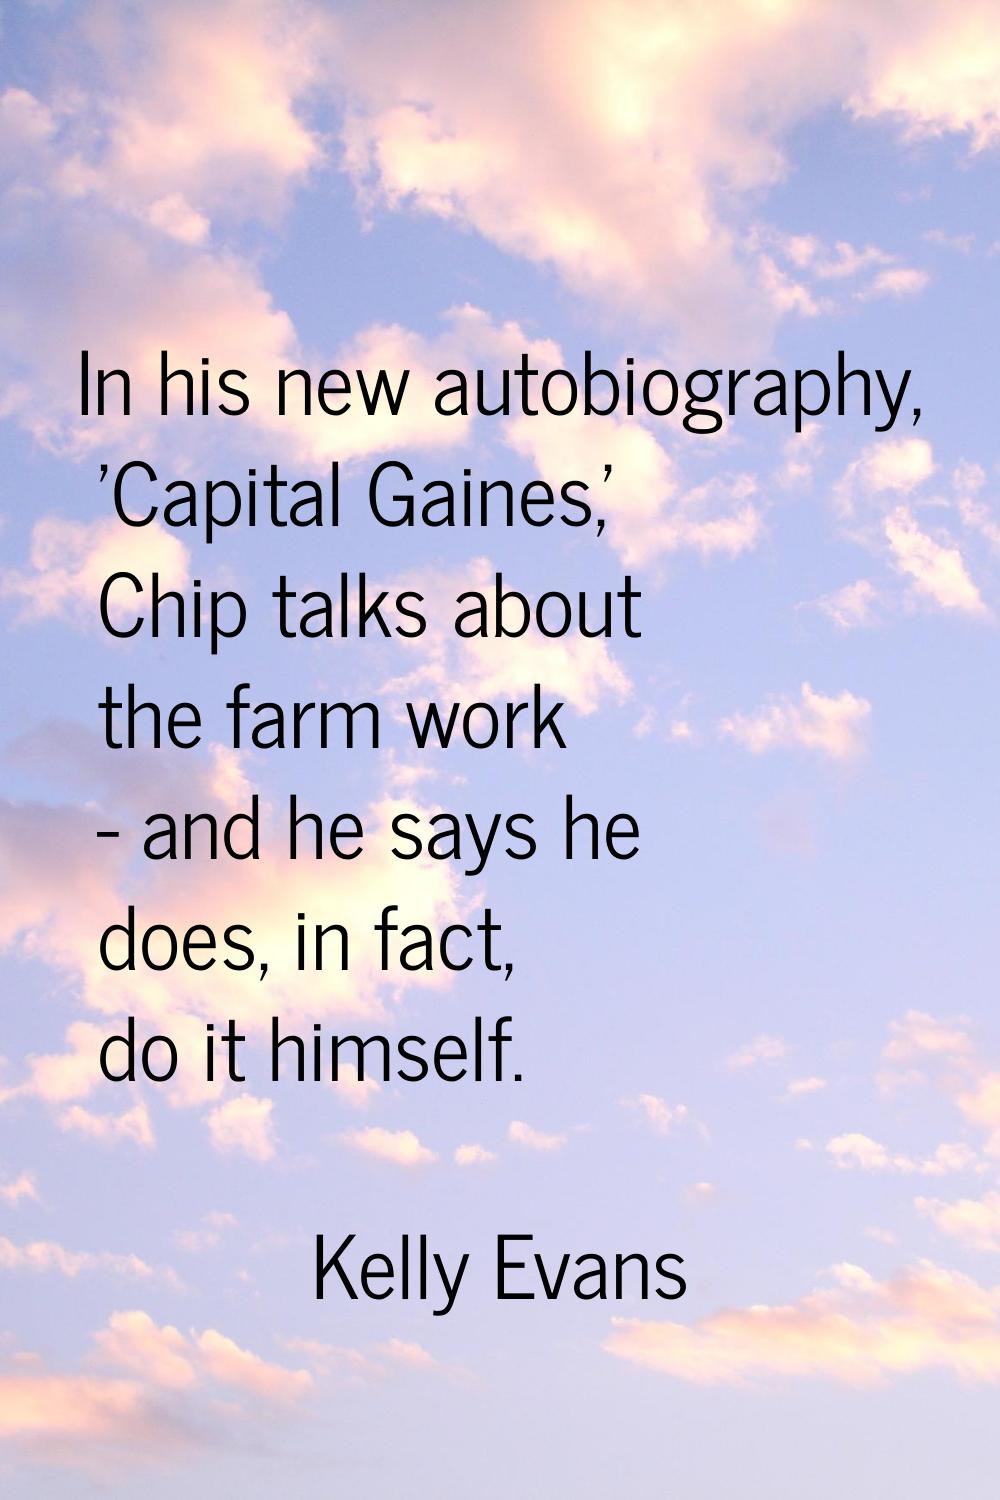 In his new autobiography, 'Capital Gaines,' Chip talks about the farm work - and he says he does, i